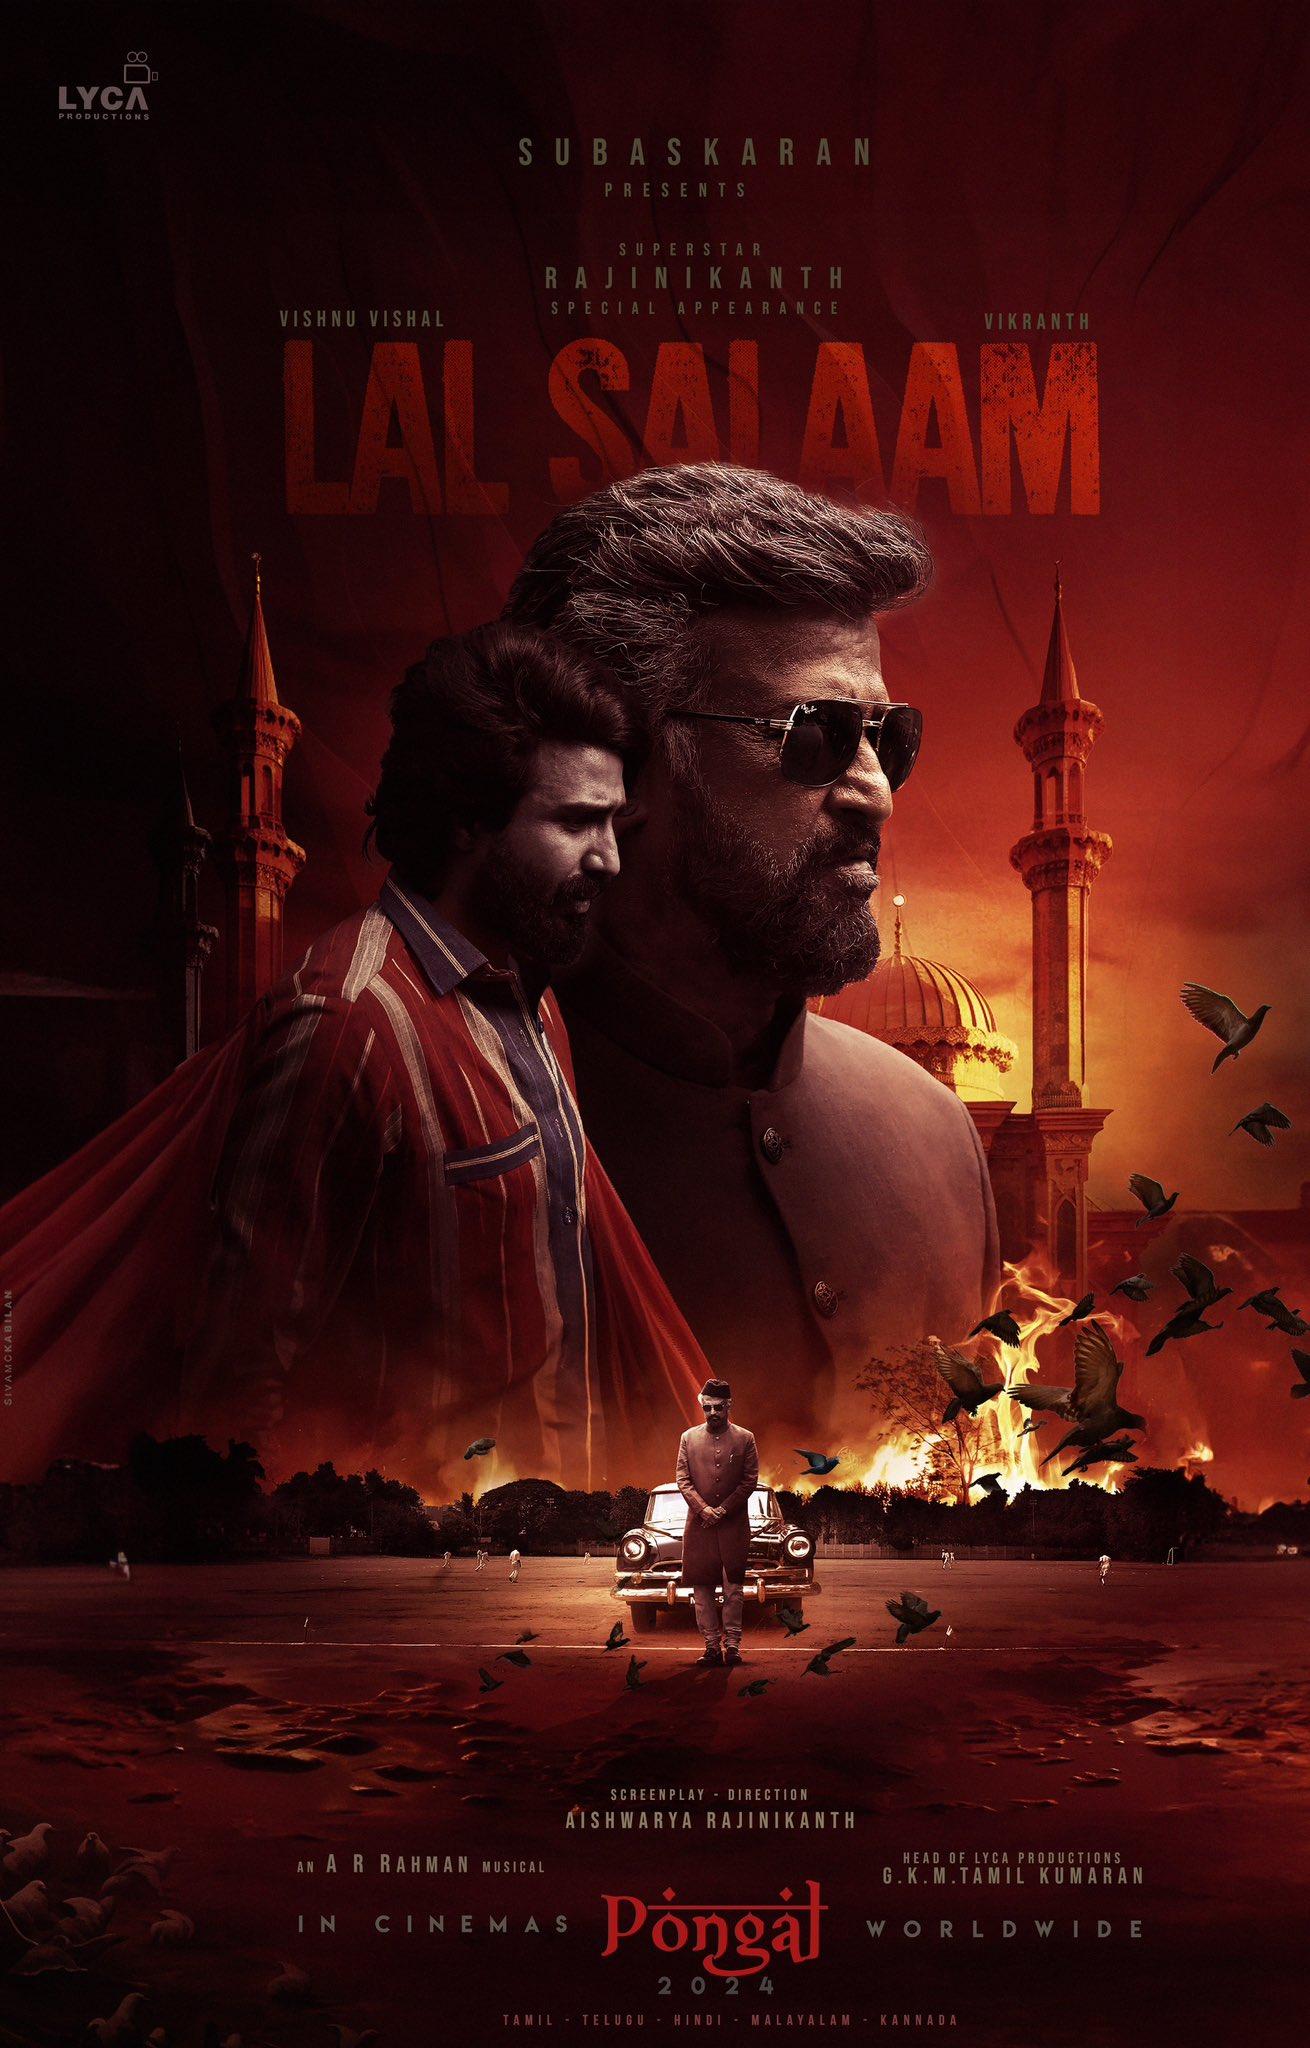 Lal SalaamAishwarya Dhanush directs 'Lal Salaam', featuring Rajinikanth in a special appearance as Modeen Bhai, a gangster who supports cricket, with Vishnu and Vishal Vikranth playing pivotal roles, adding intrigue to this Tamil release.